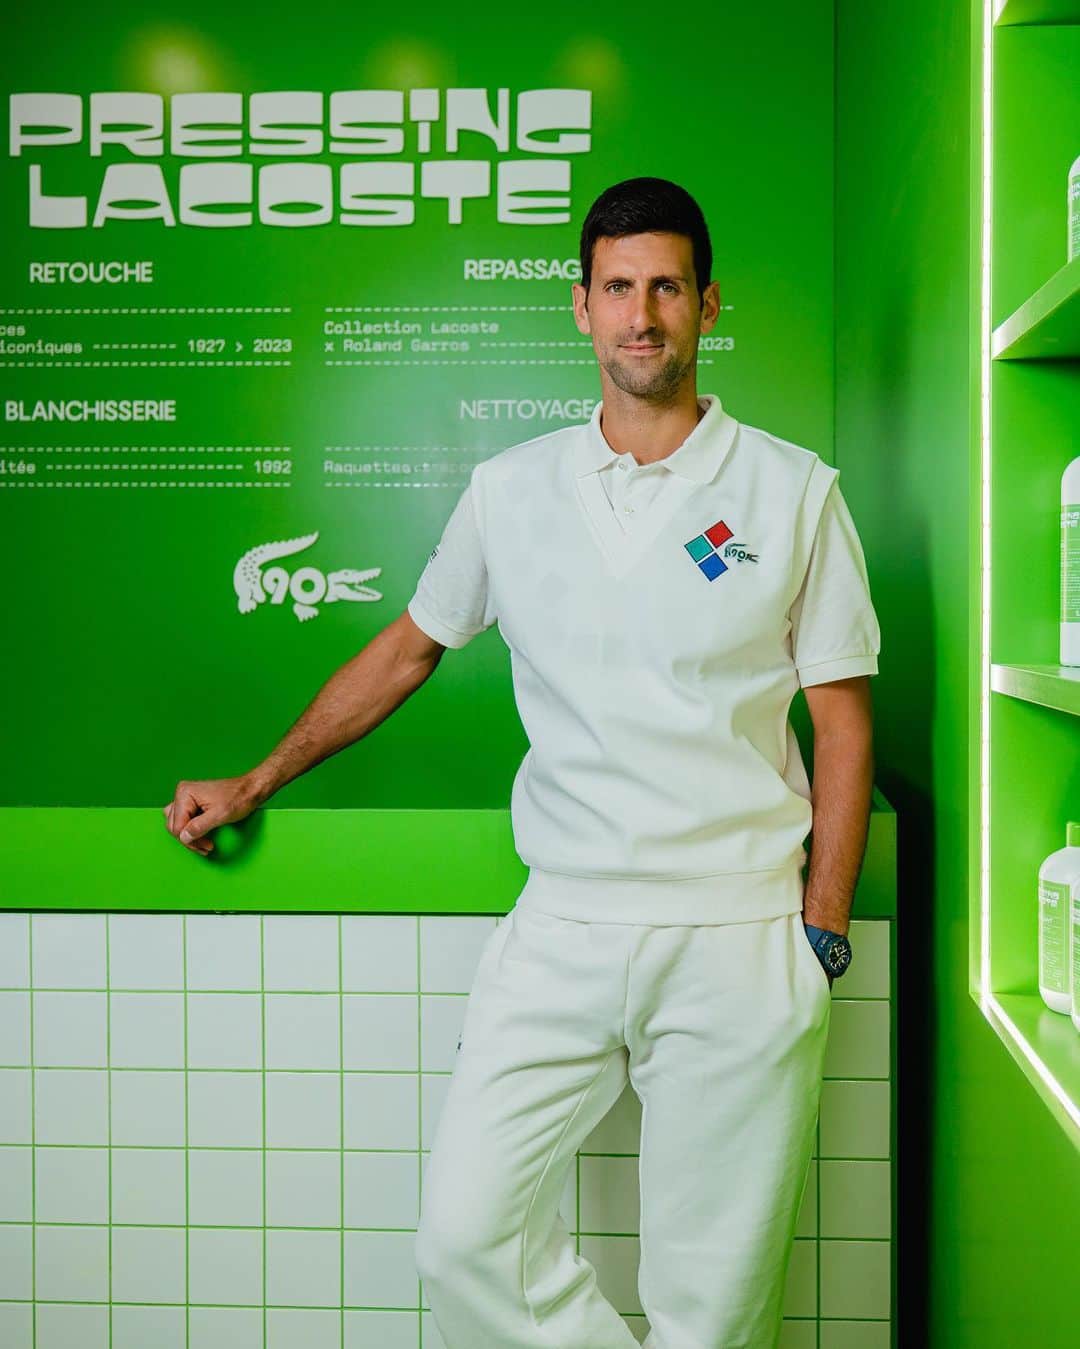 Lacosteのインスタグラム：「D-2 until Roland-Garros. Let's celebrate 90 years of style at RG in an exclusive pop-up 📍in Paris. Re-discover the strong tennis heritage of Lacoste at "Pressing Lacoste" - 51, rue de Turenne - Paris. 🎾🐊 Open until Sunday 28th, 11am - 7pm, free entrance.」